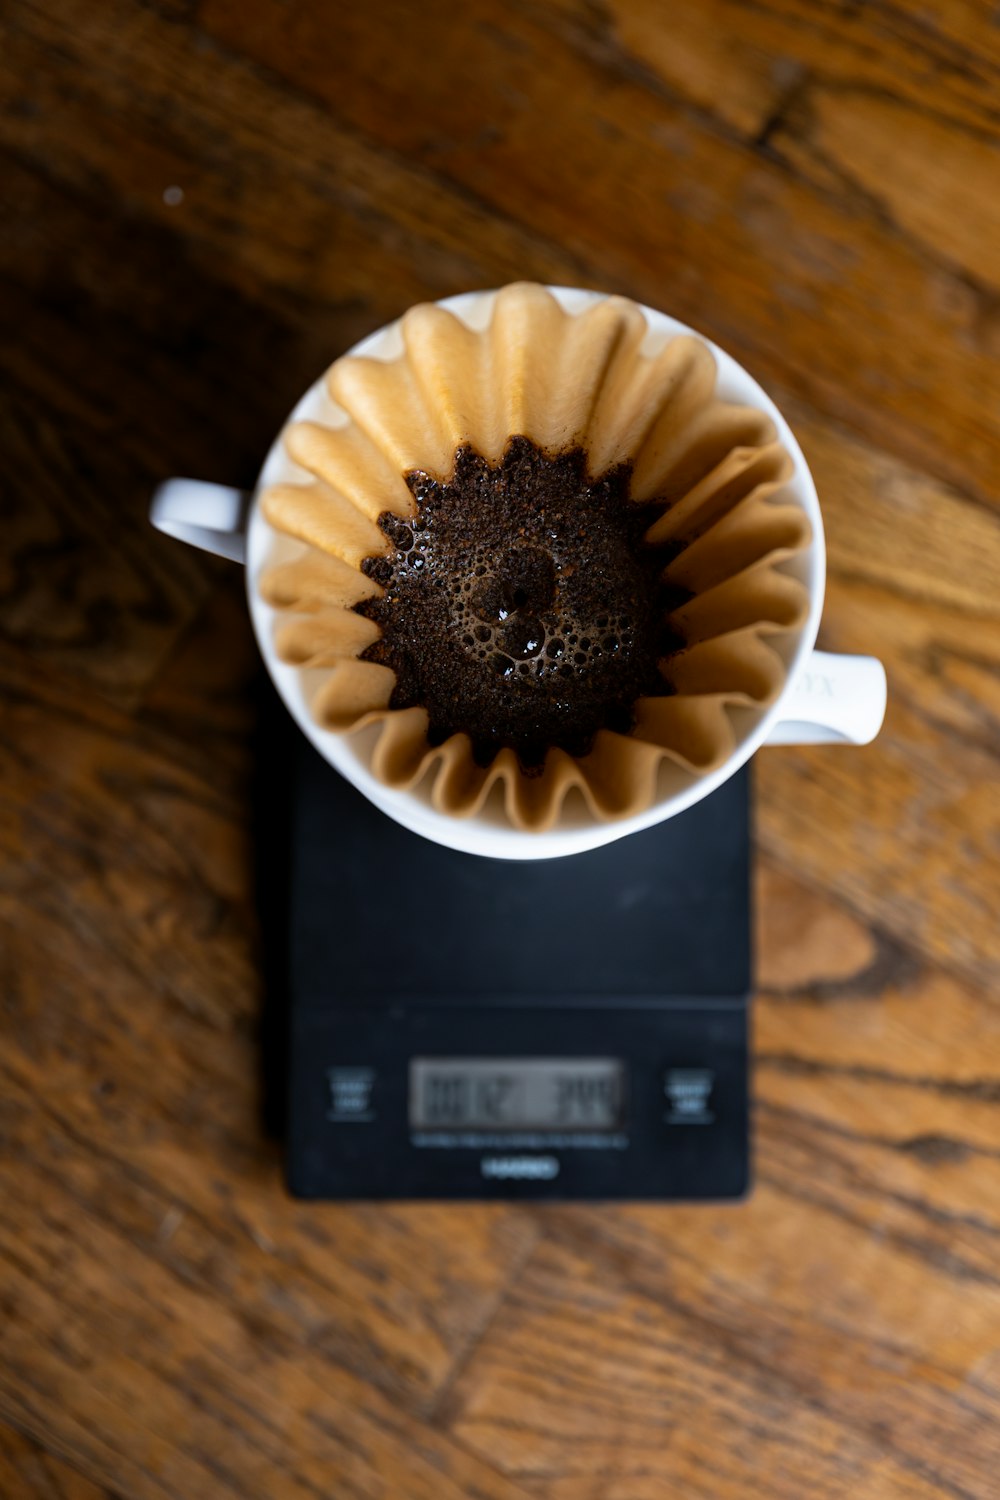 a cup of coffee sitting on top of a scale